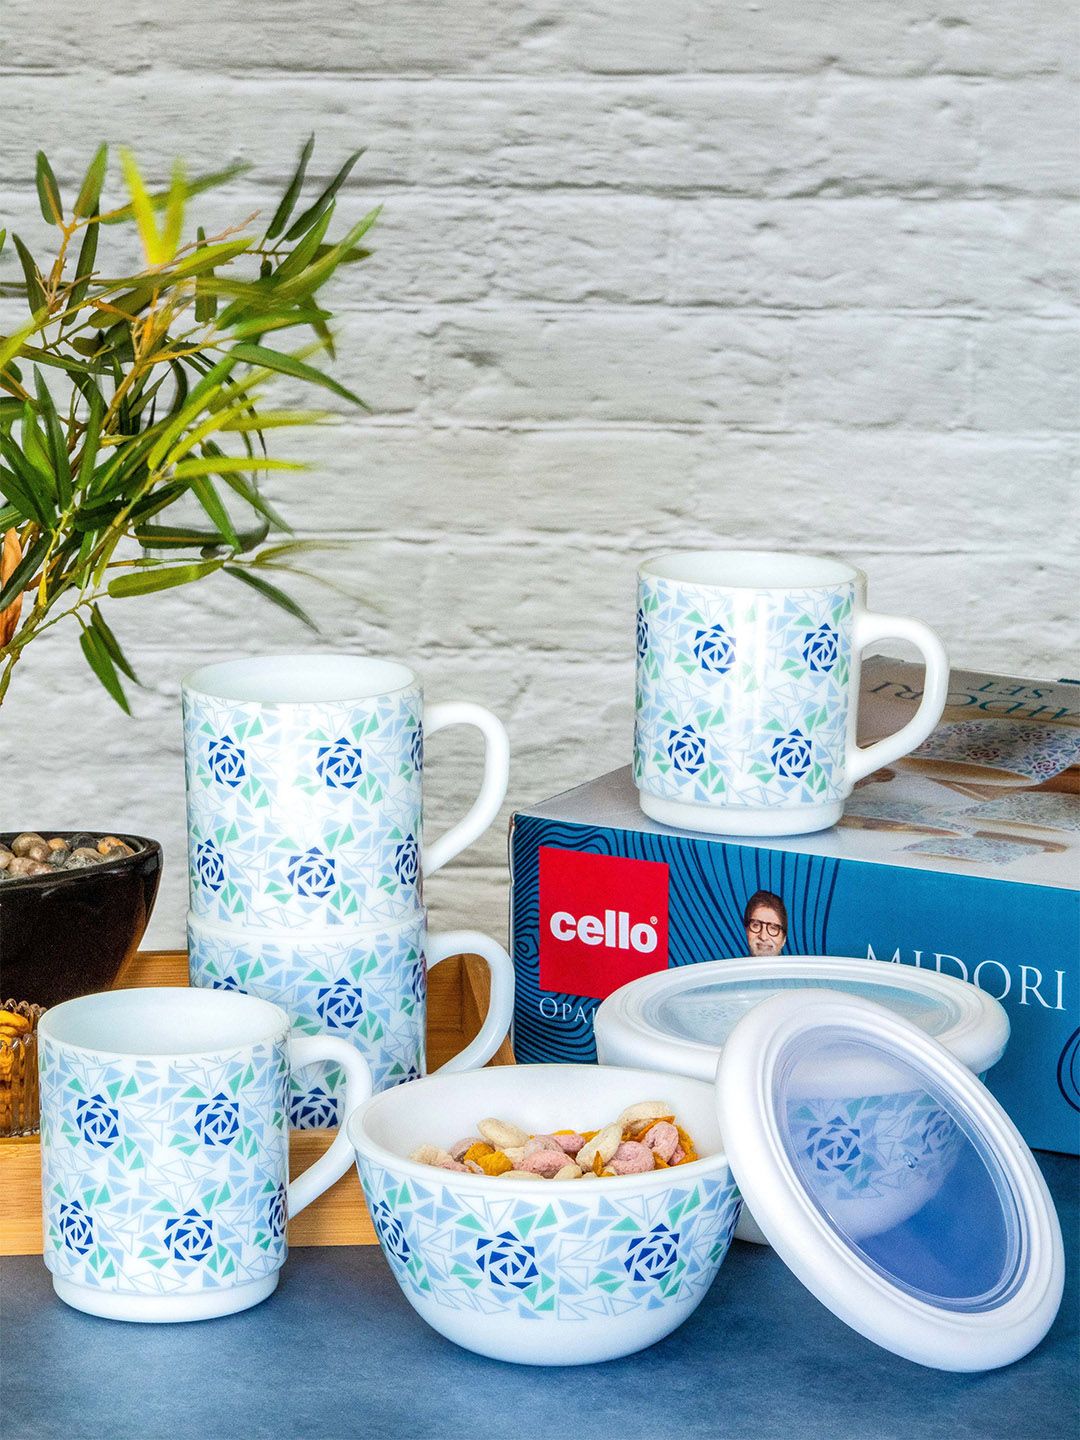 Cello White & Blue Blue Blue Ethnic Motifs Printed Opalware Glossy Mug and Bowl Set of Cups and Mugs Price in India